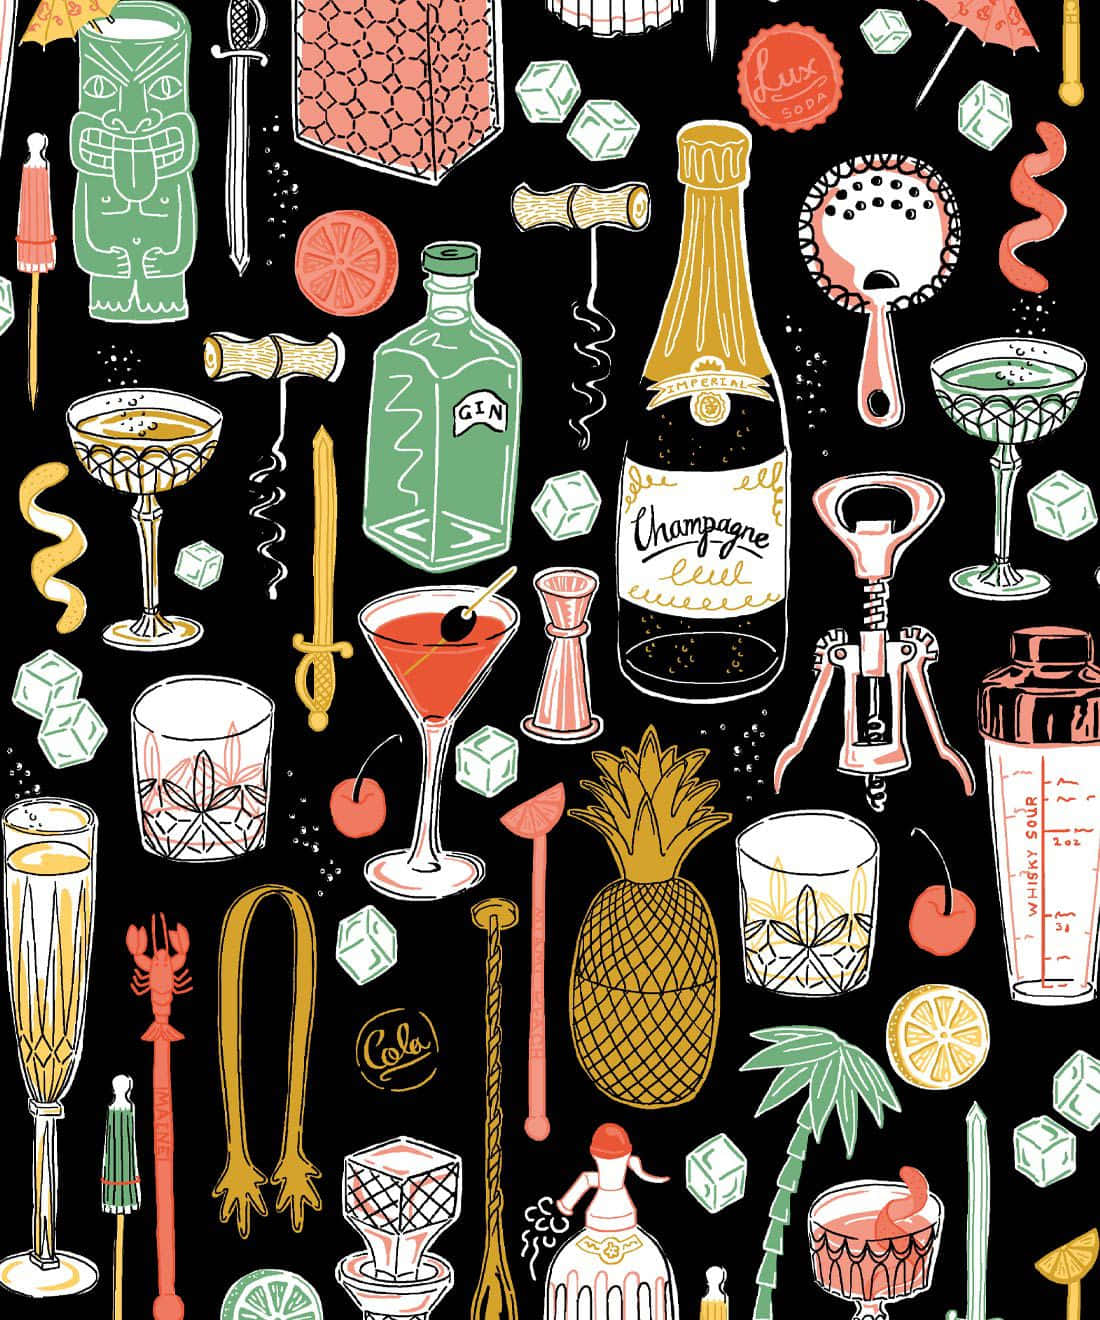 Animated Cocktail and Equipment Wallpaper